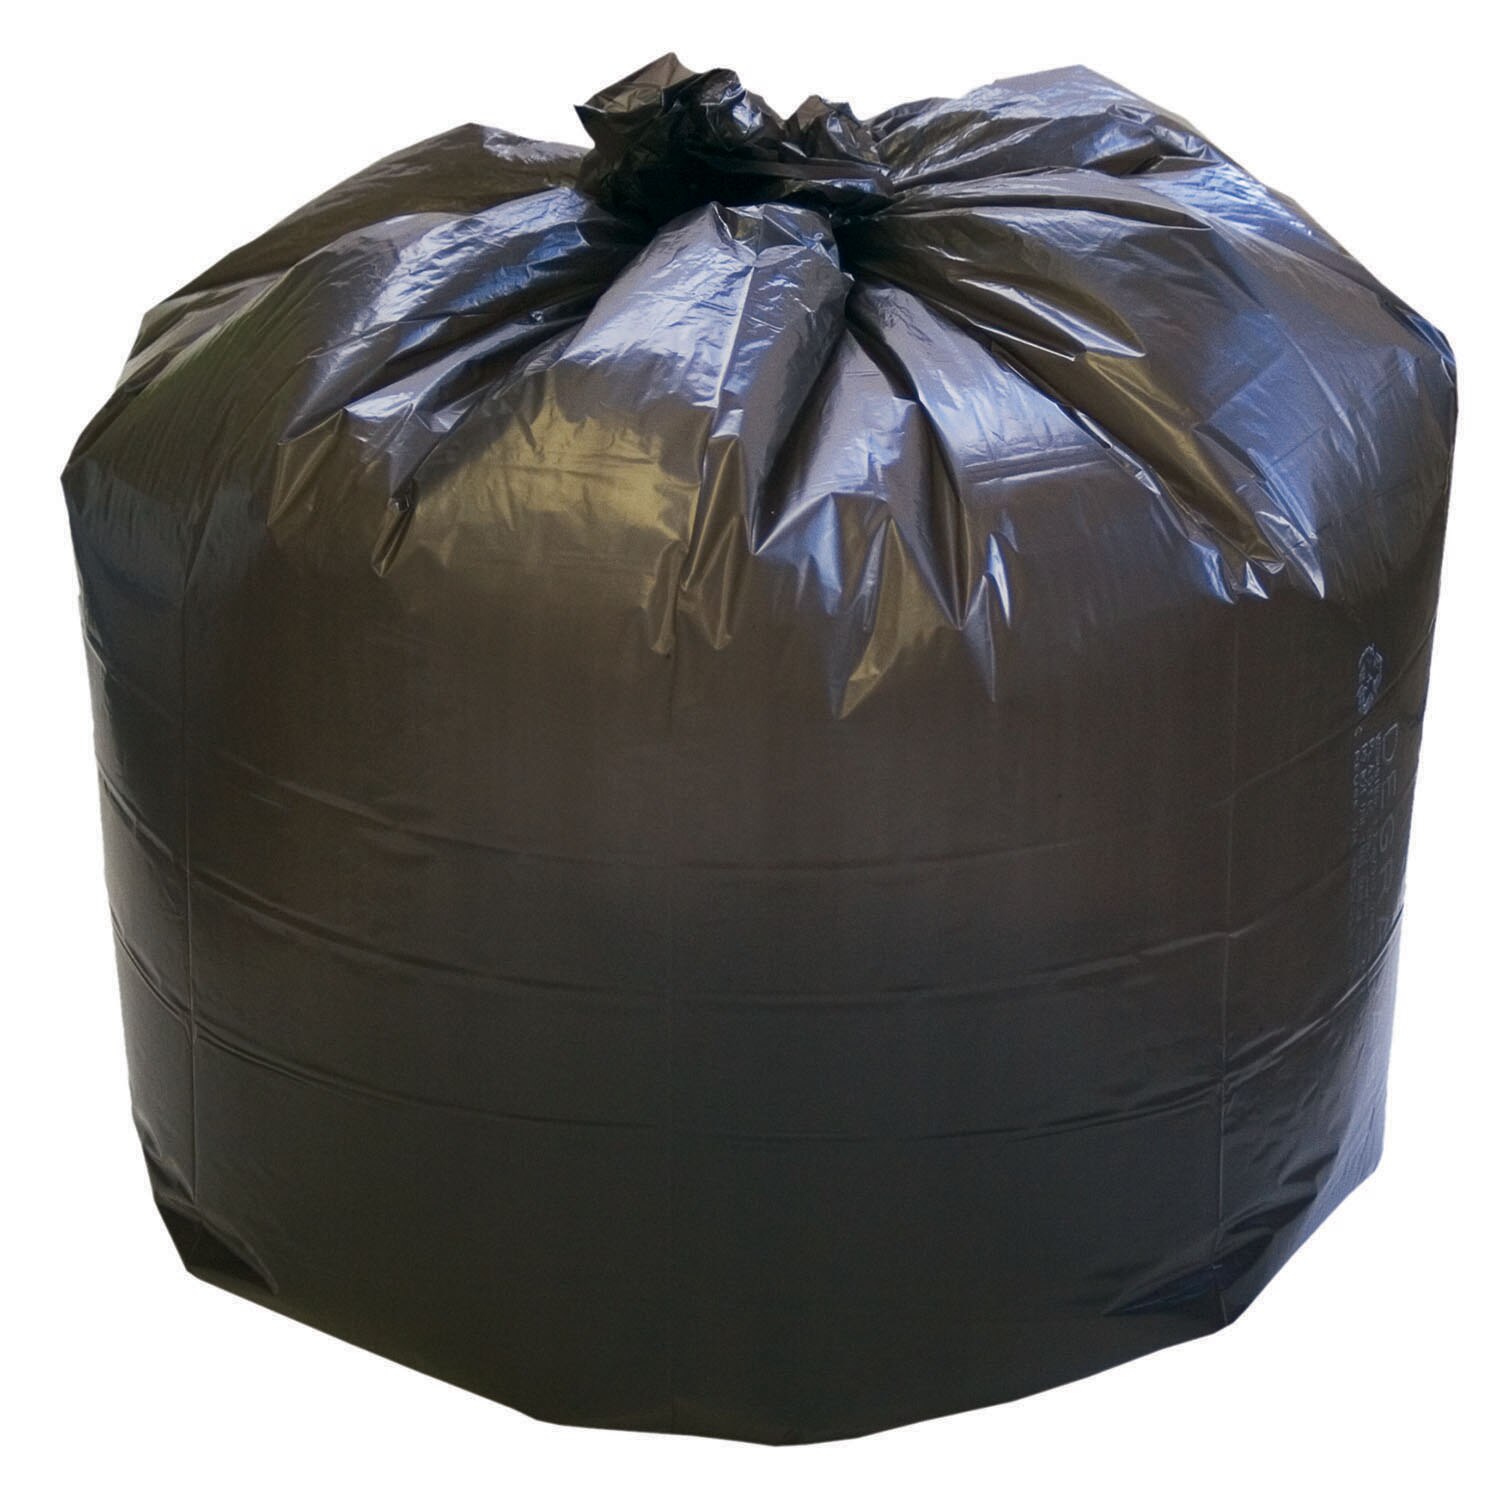 Bag, Trash, Recycled, Extra Extra Heavy Duty, Black or Brown, 40" x 46", Black or Brown